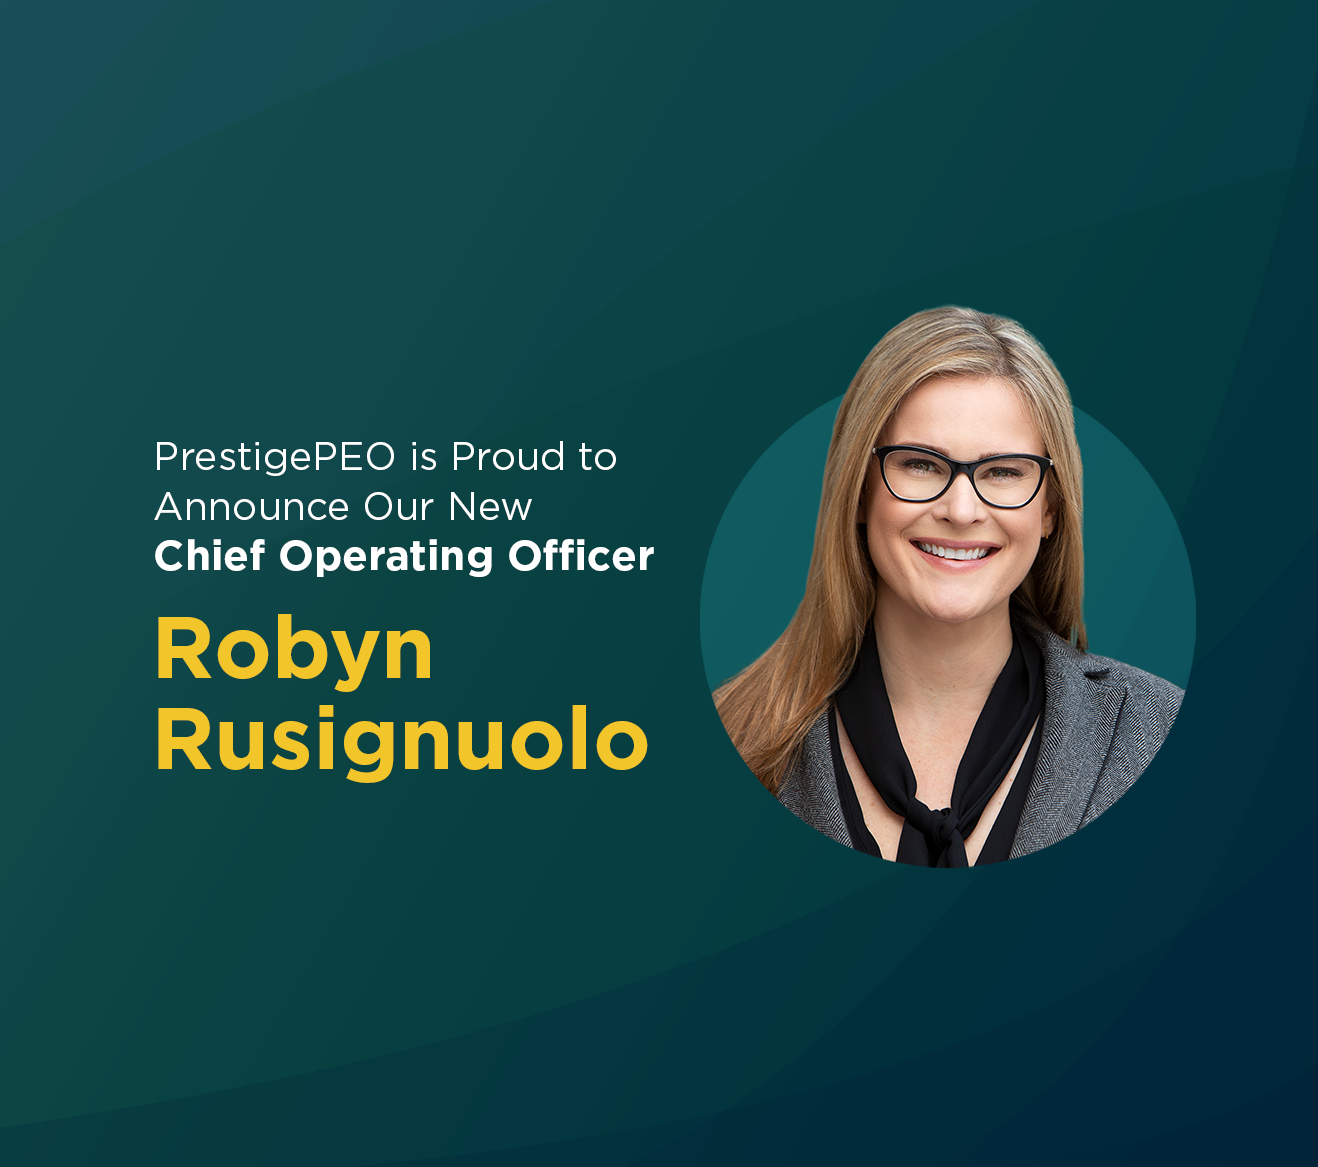 PrestigePEO Appoints Robyn Rusignuolo as Chief Operating Officer